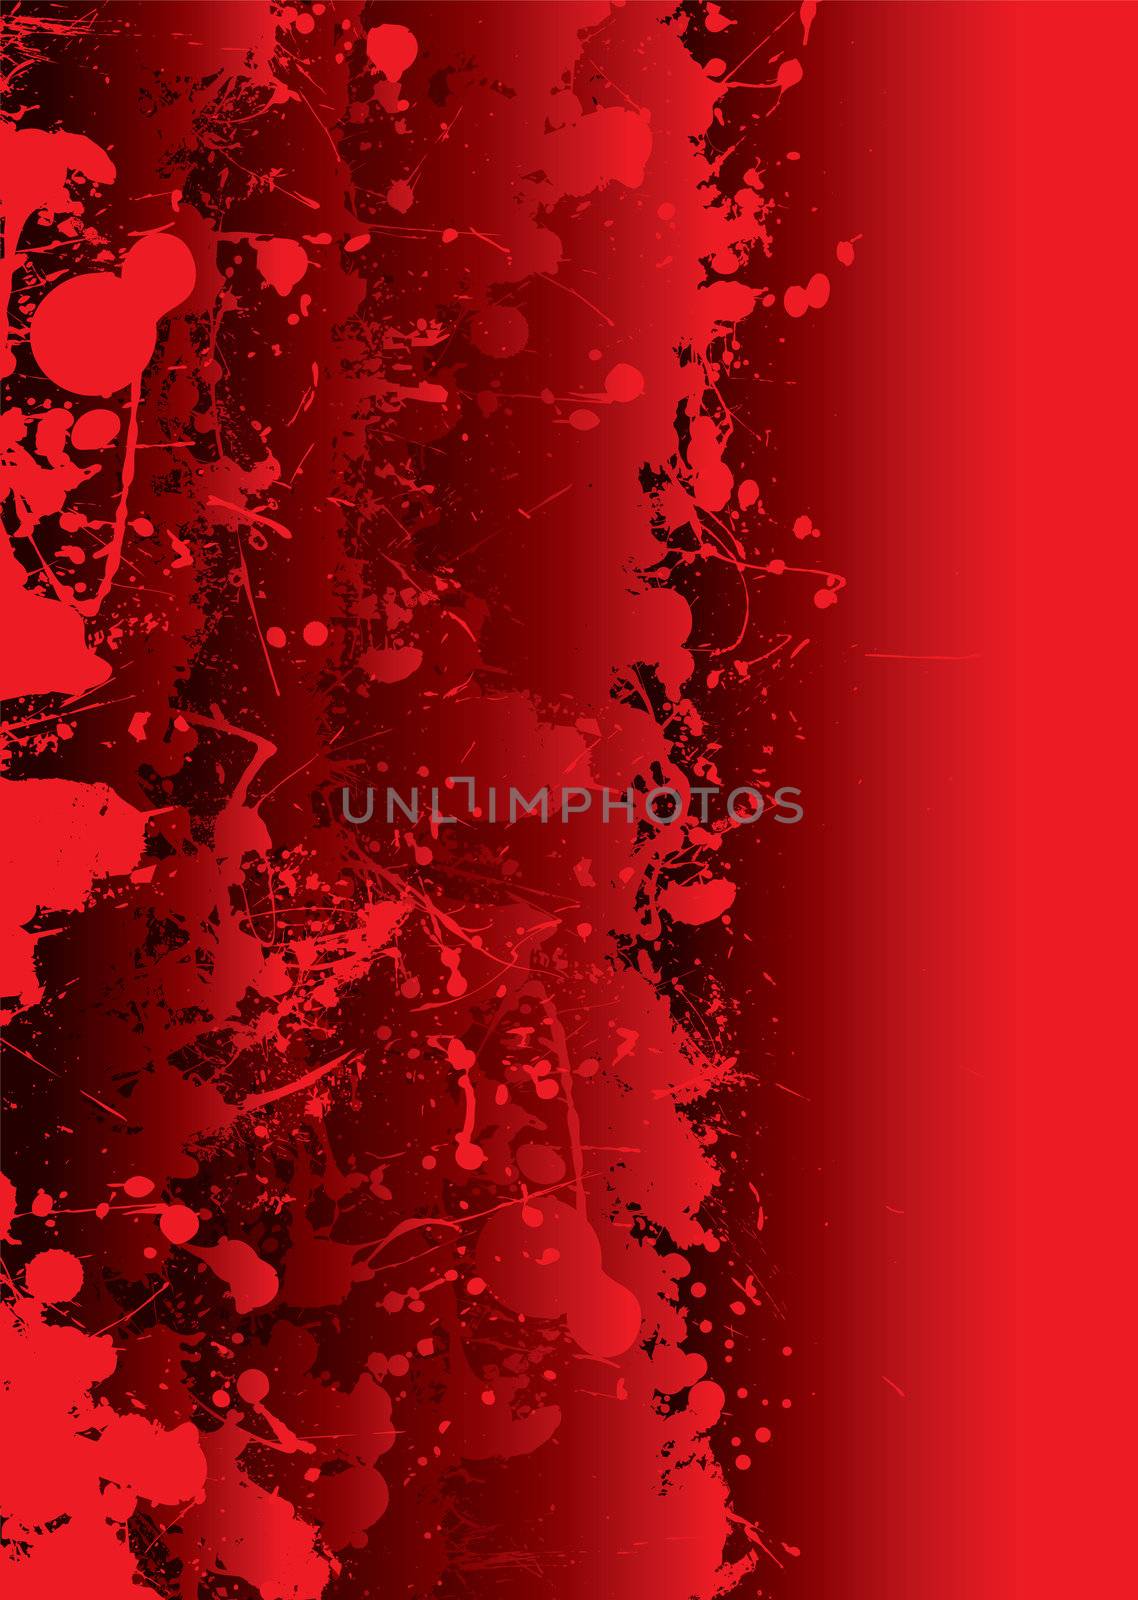 Blood red background with overlapping elements and splat